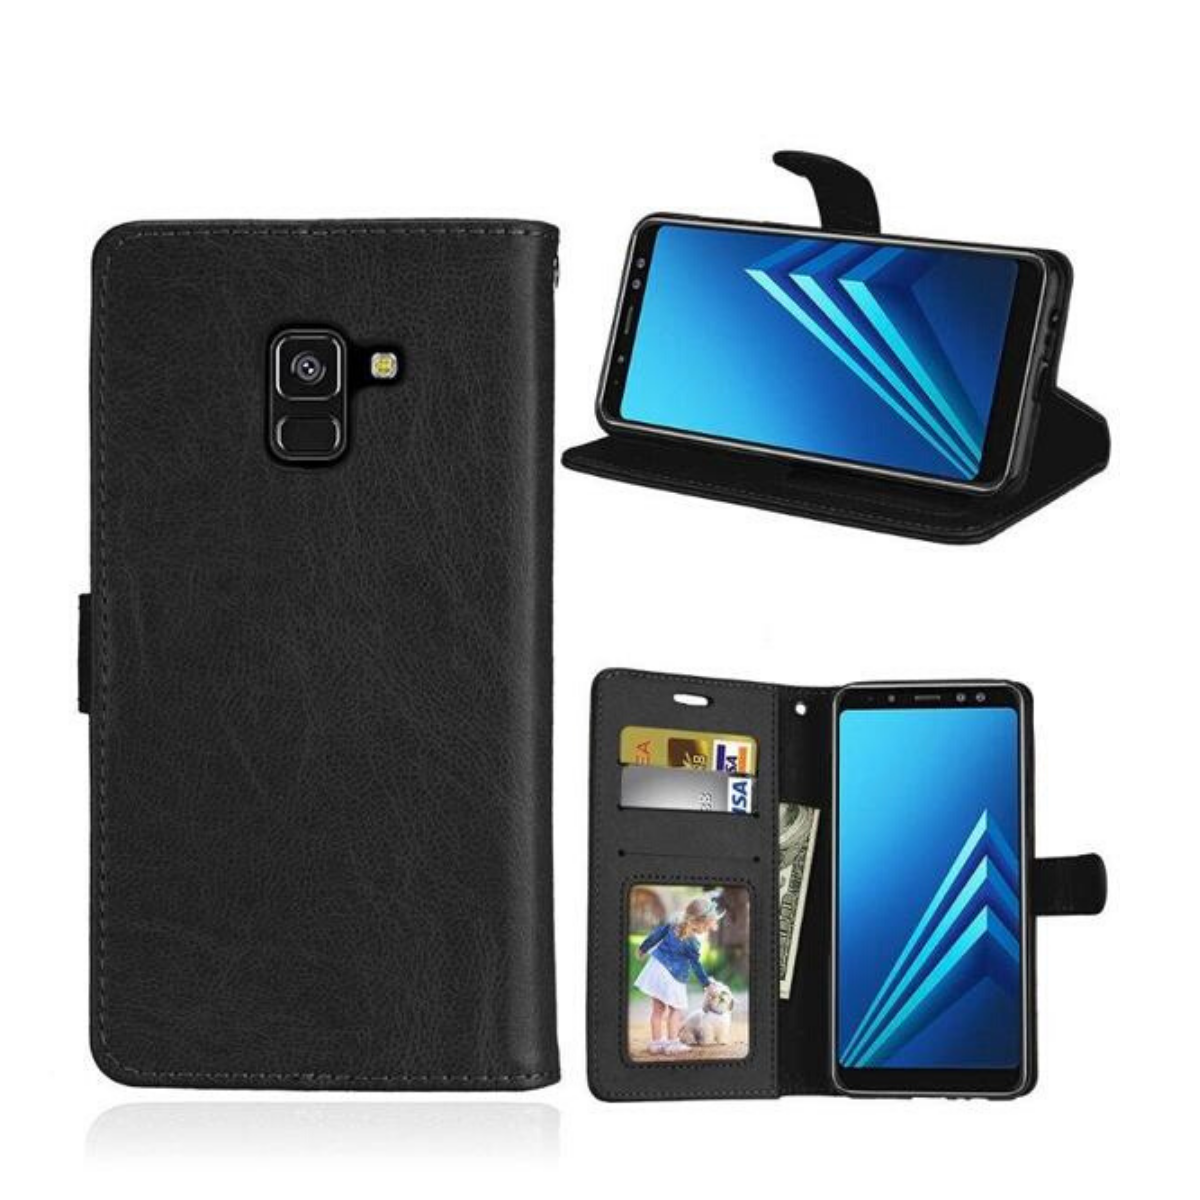 Galaxy Note 8 Cases